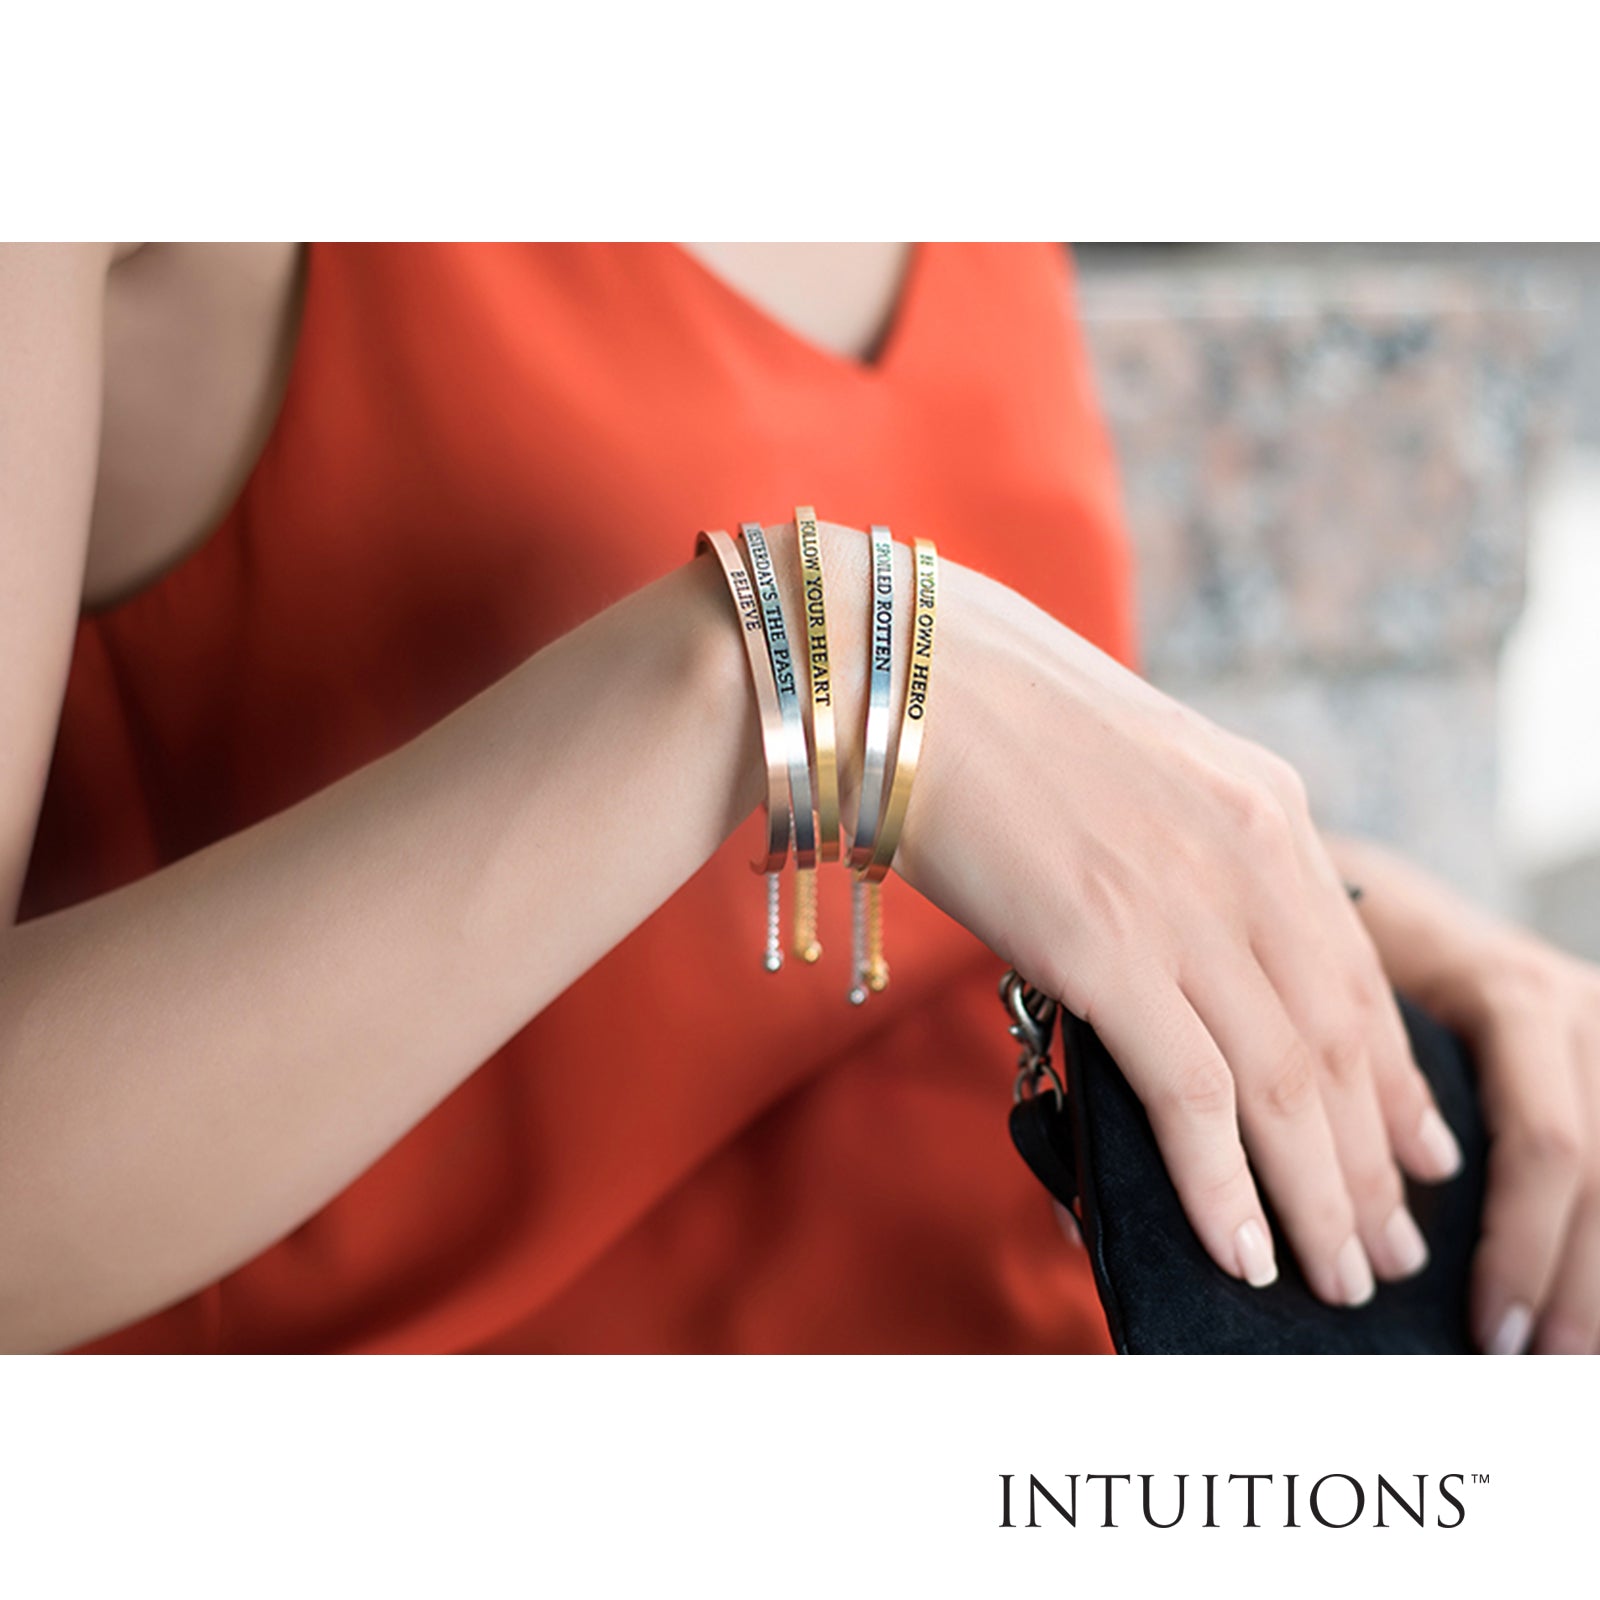 Intuitions Stainless Steel LIFE IS SHORT.SMILE. Diamond Accent Cuff Bangle Bracelet fine designer jewelry for men and women